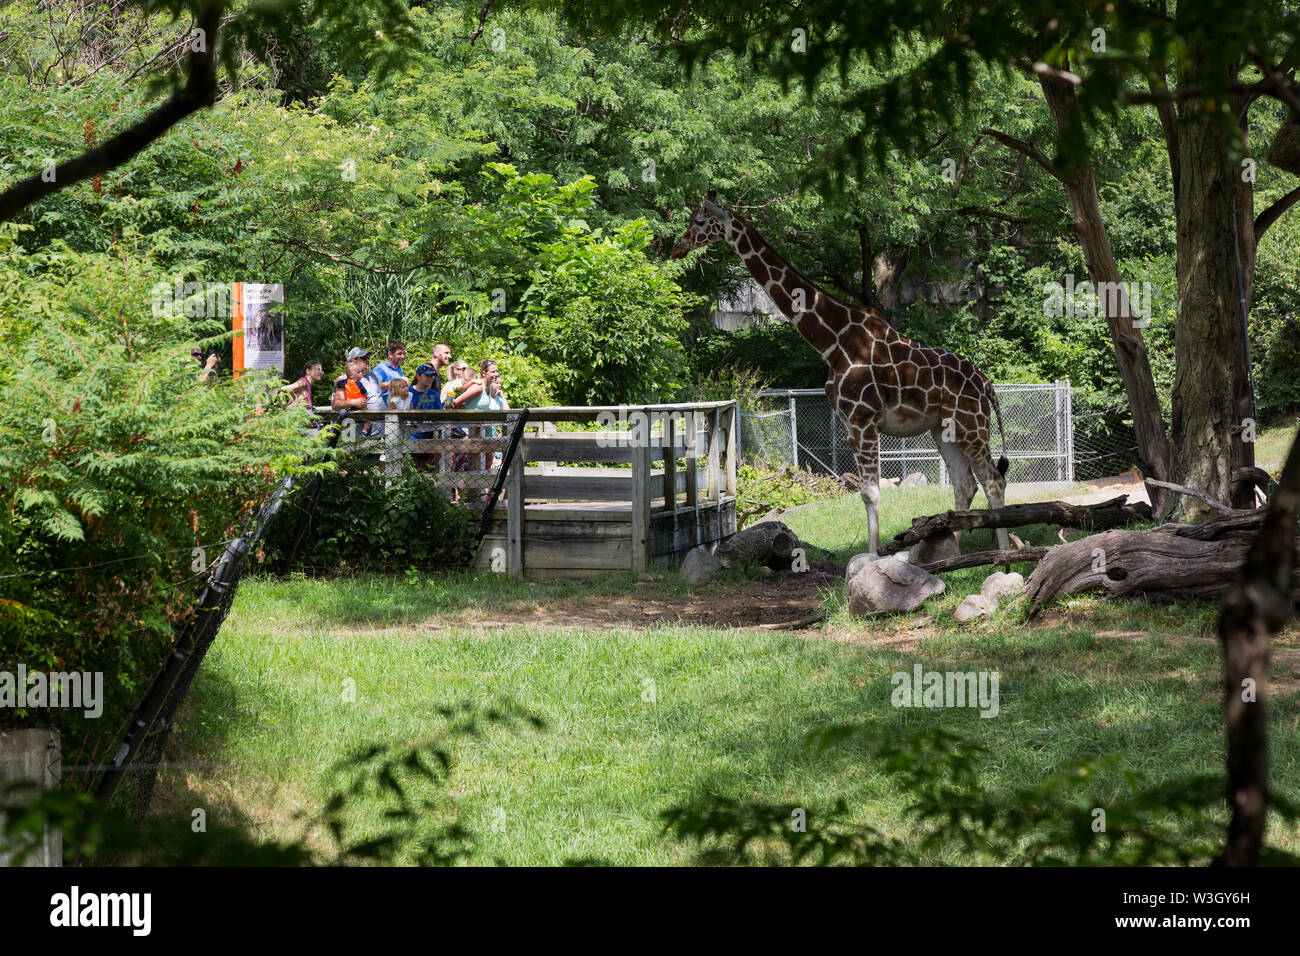 Visitors react to a giraffe as he approaches the observation deck at the edge of his exhibit in the Indianapolis Zoo in Indiana, USA. Stock Photo